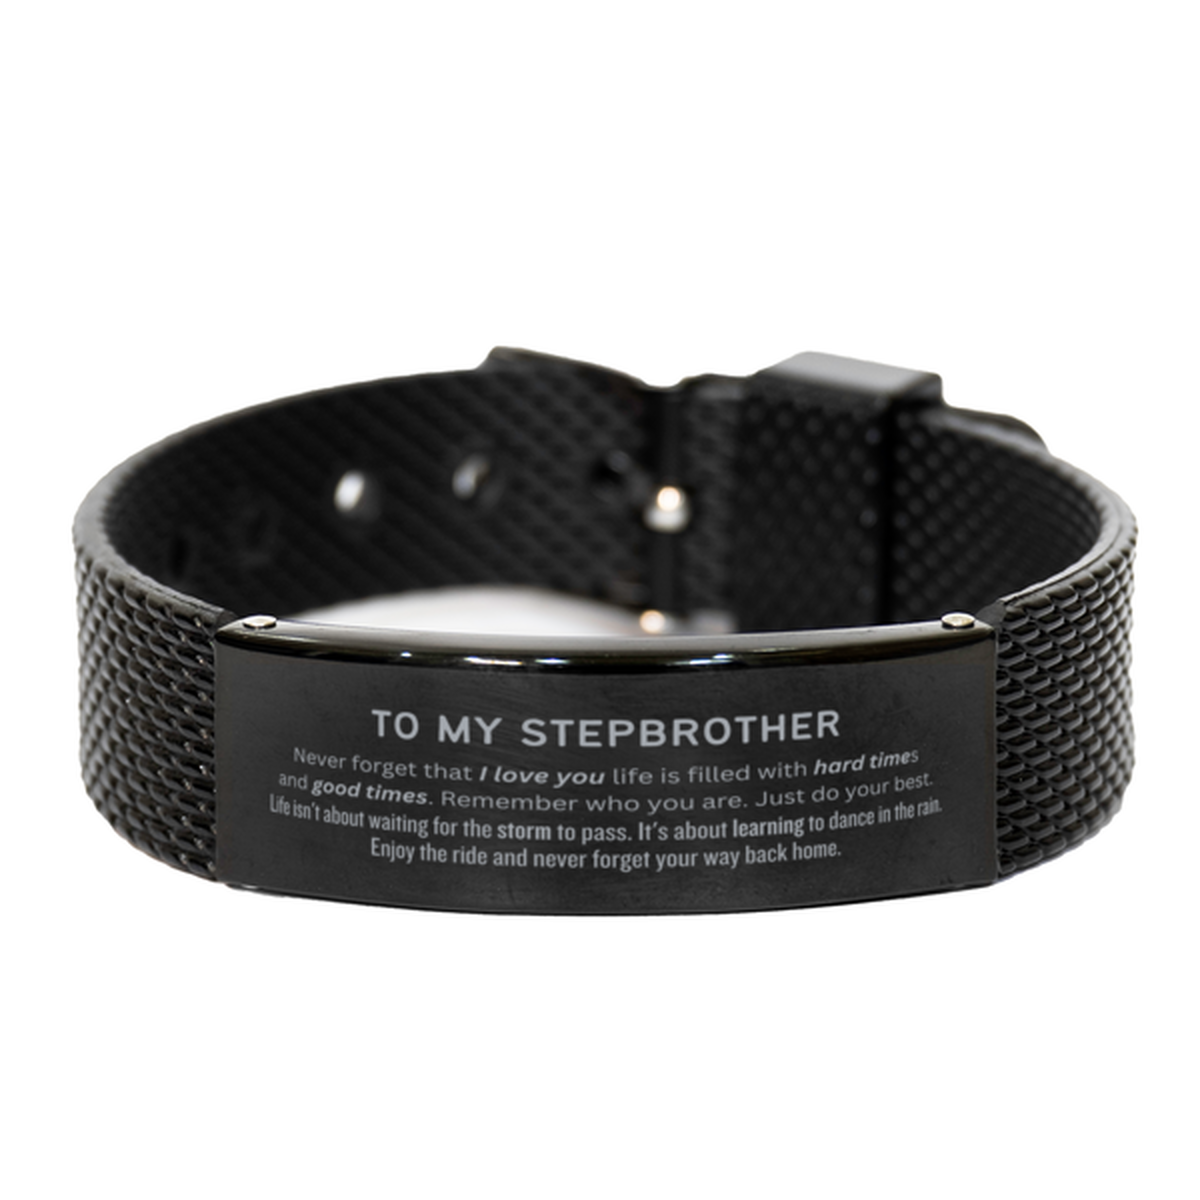 Christmas Stepbrother Black Shark Mesh Bracelet Gifts, To My Stepbrother Birthday Thank You Gifts For Stepbrother, Graduation Unique Gifts For Stepbrother To My Stepbrother Never forget that I love you life is filled with hard times and good times. Rememb